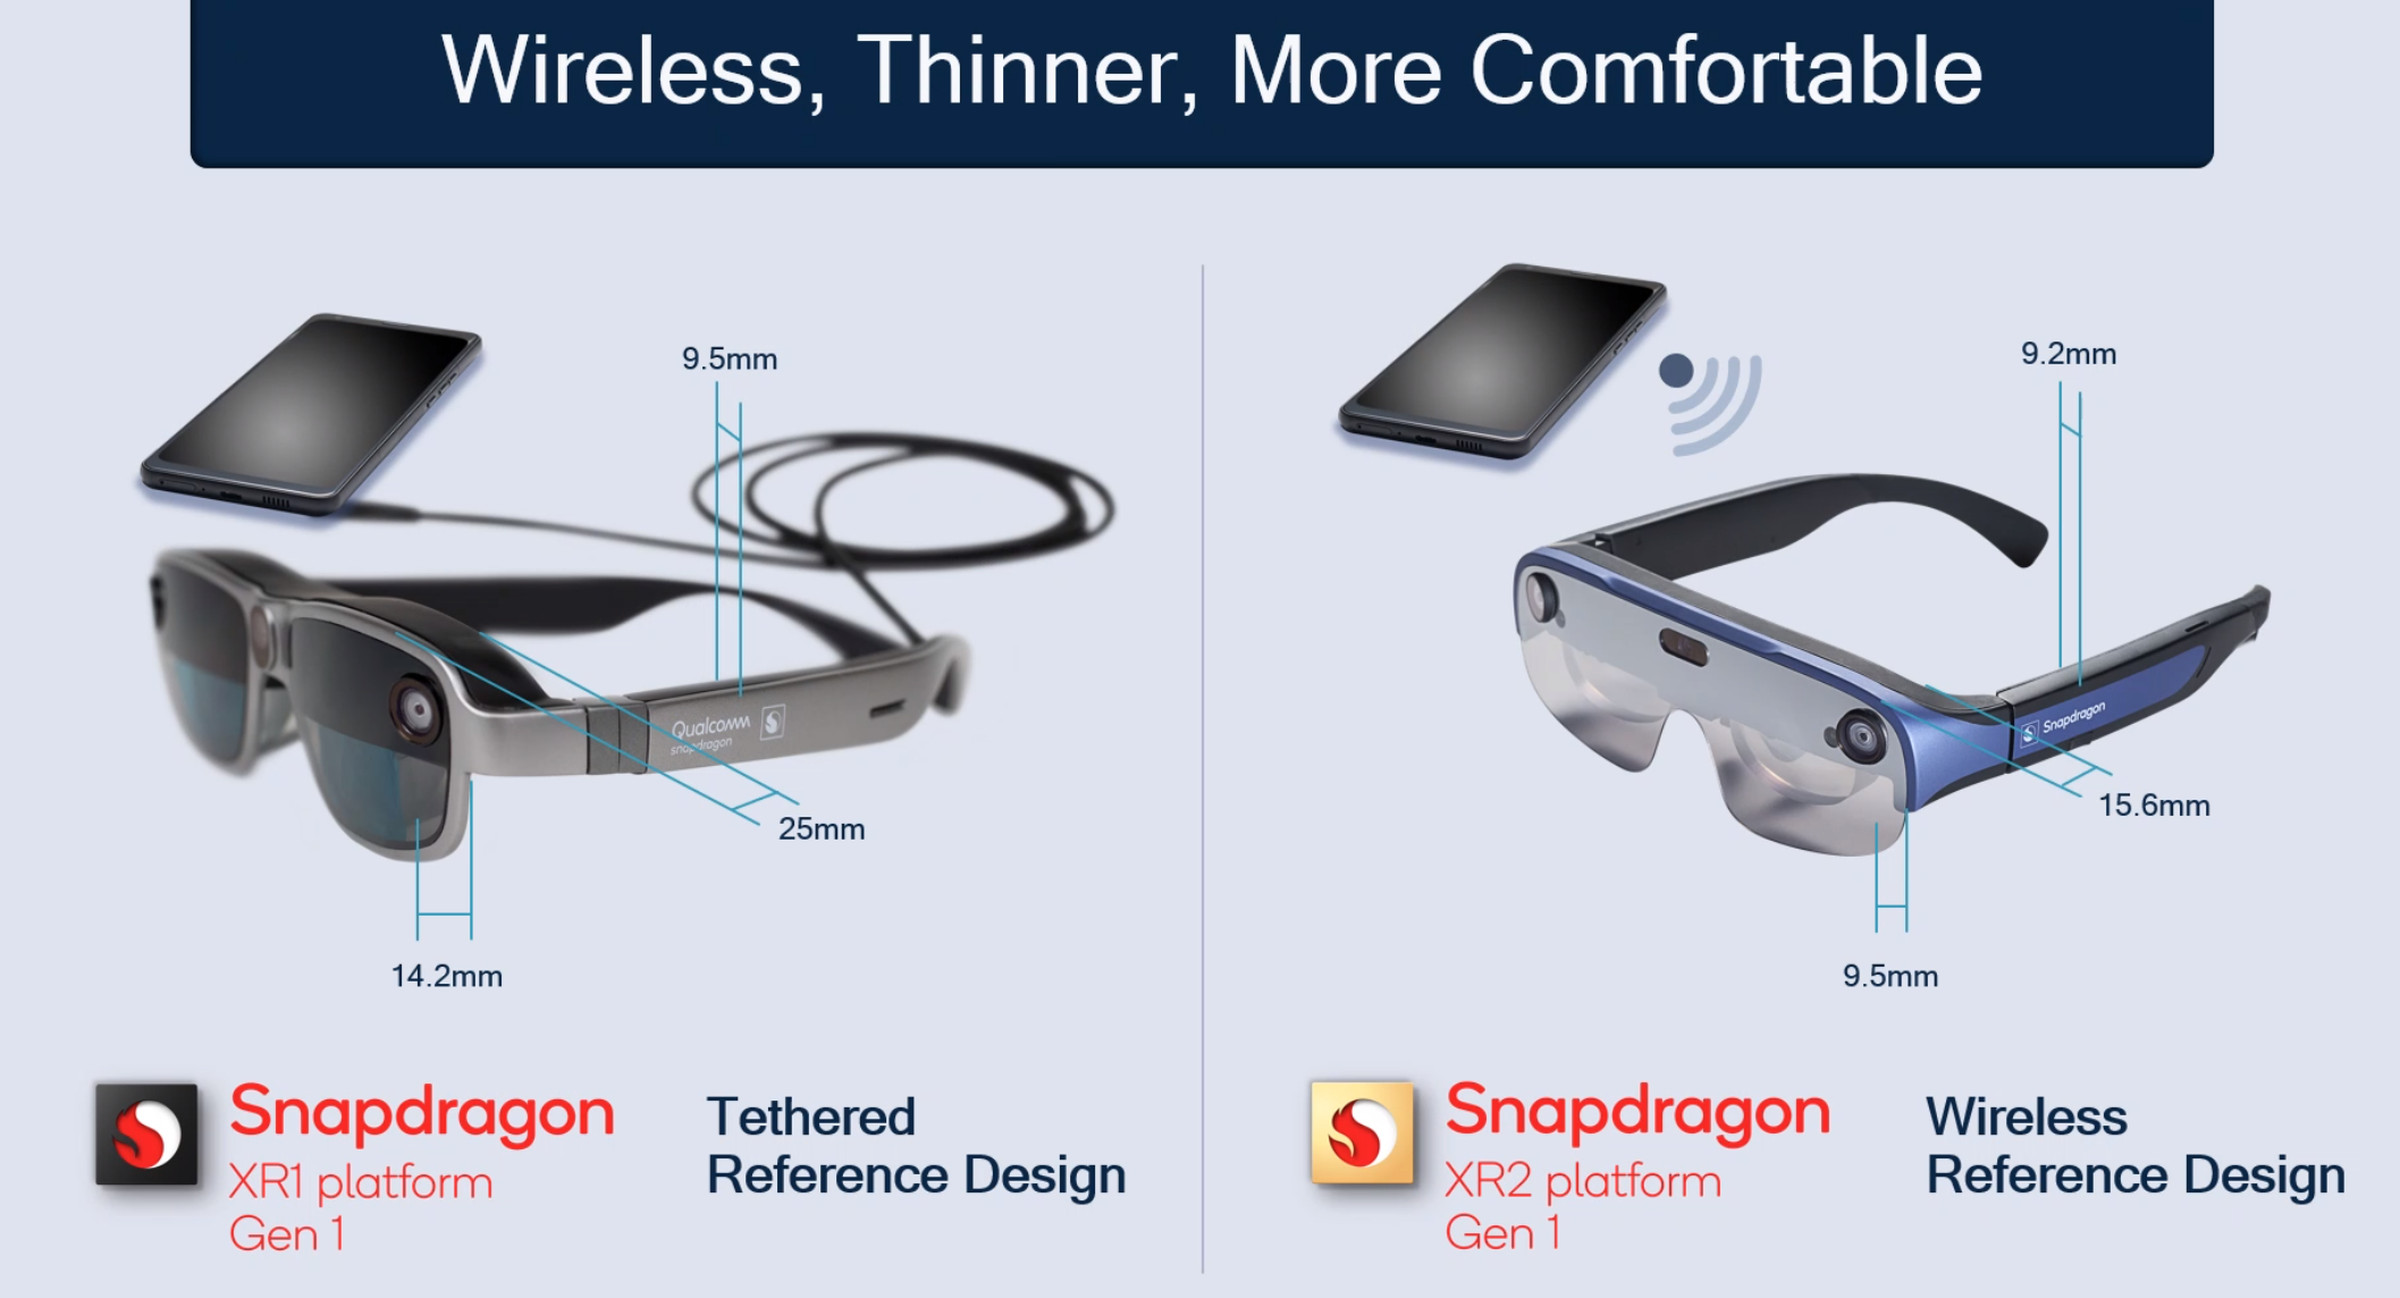 Qualcomm reference designs for wired and wireless smart glasses